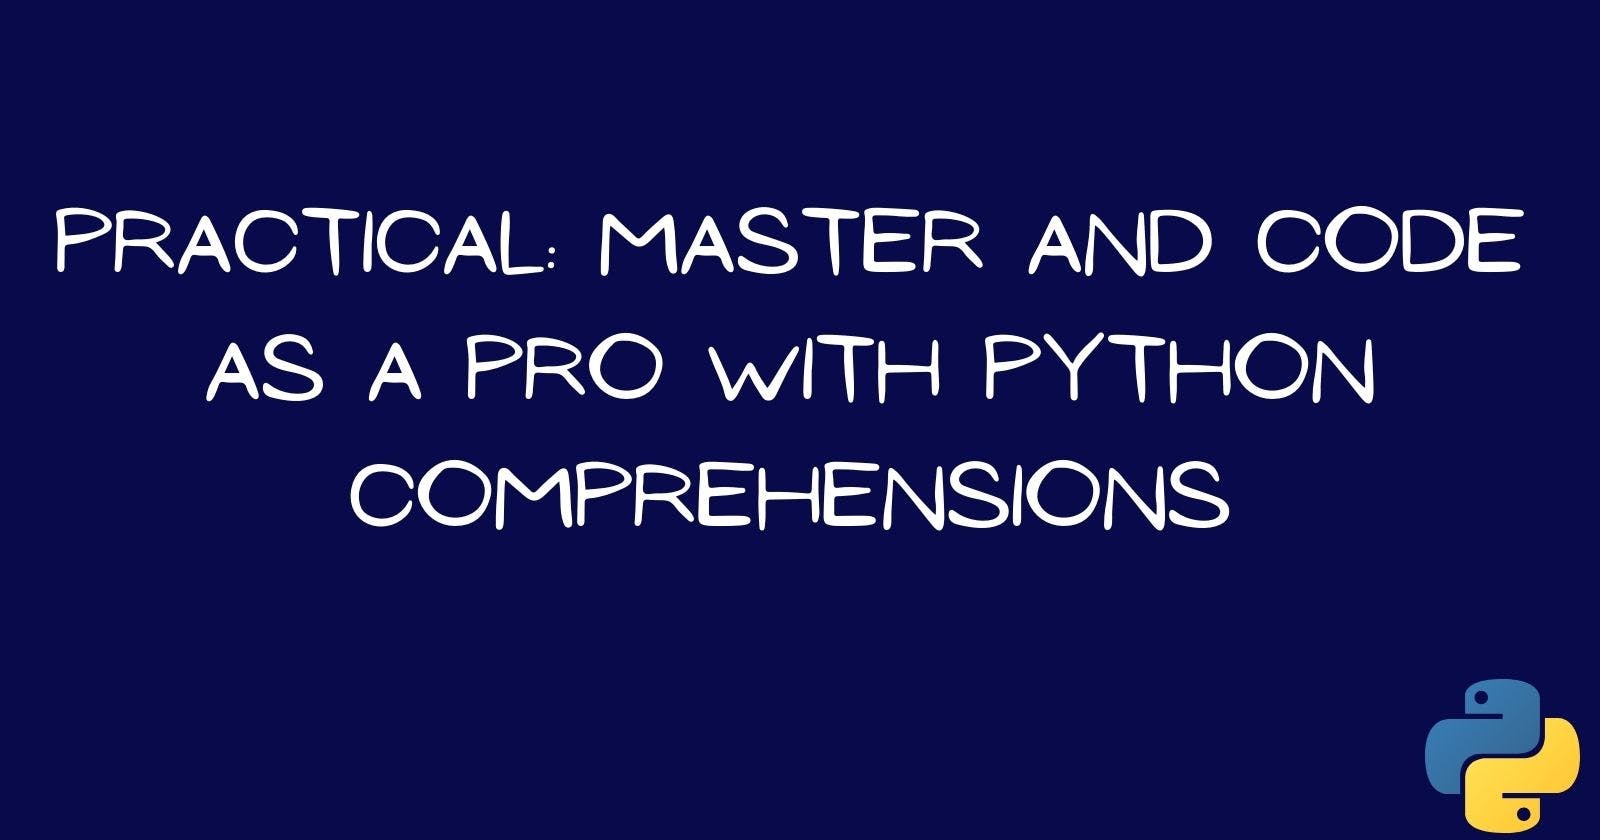 Practical: Master and Code as a Pro with Python Comprehensions